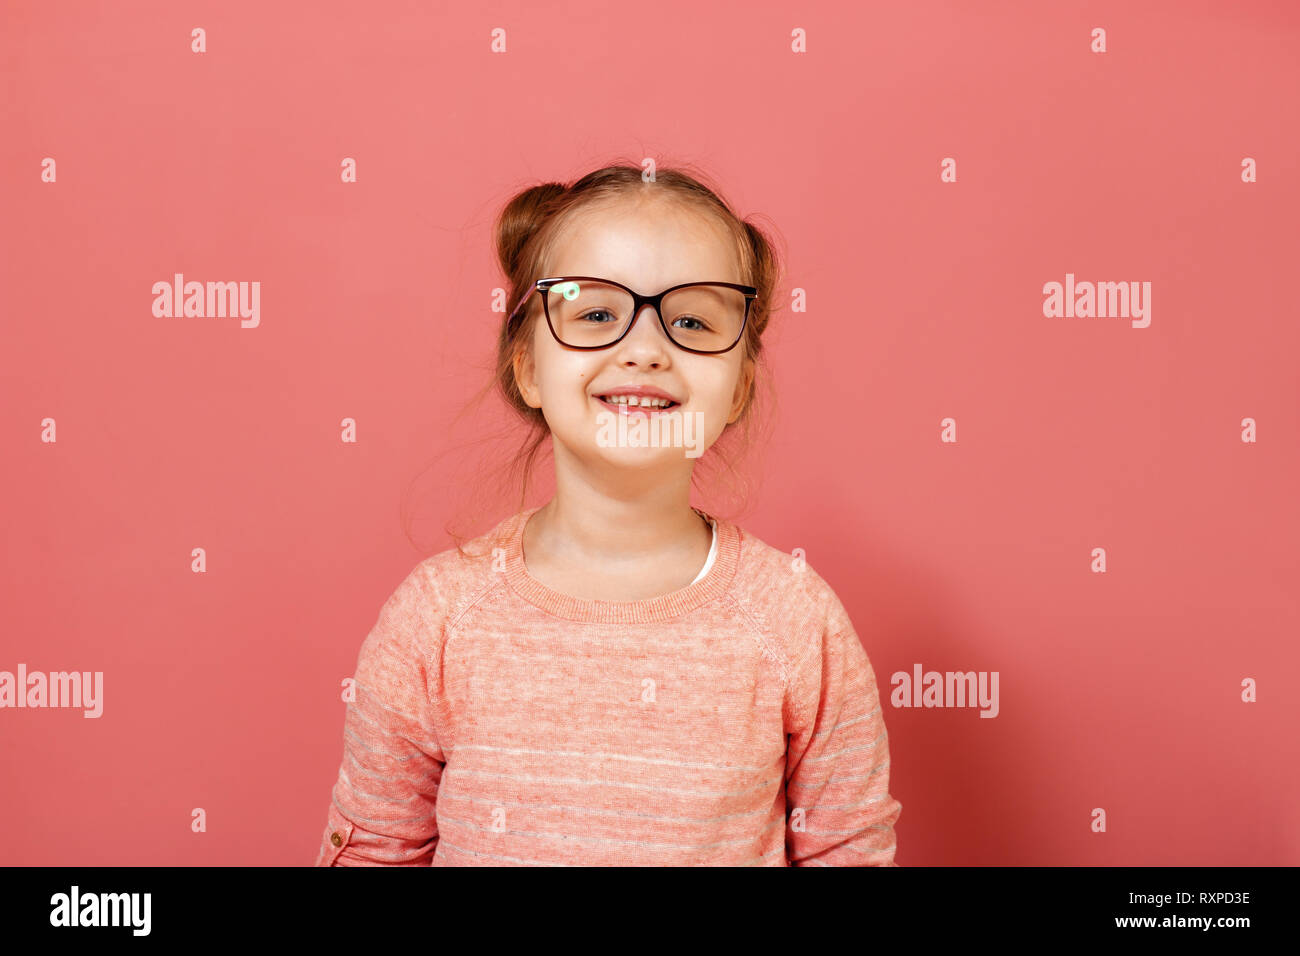 Portrait of a cute little 6 year old girl wearing eyeglasses on a pink background Stock Photo